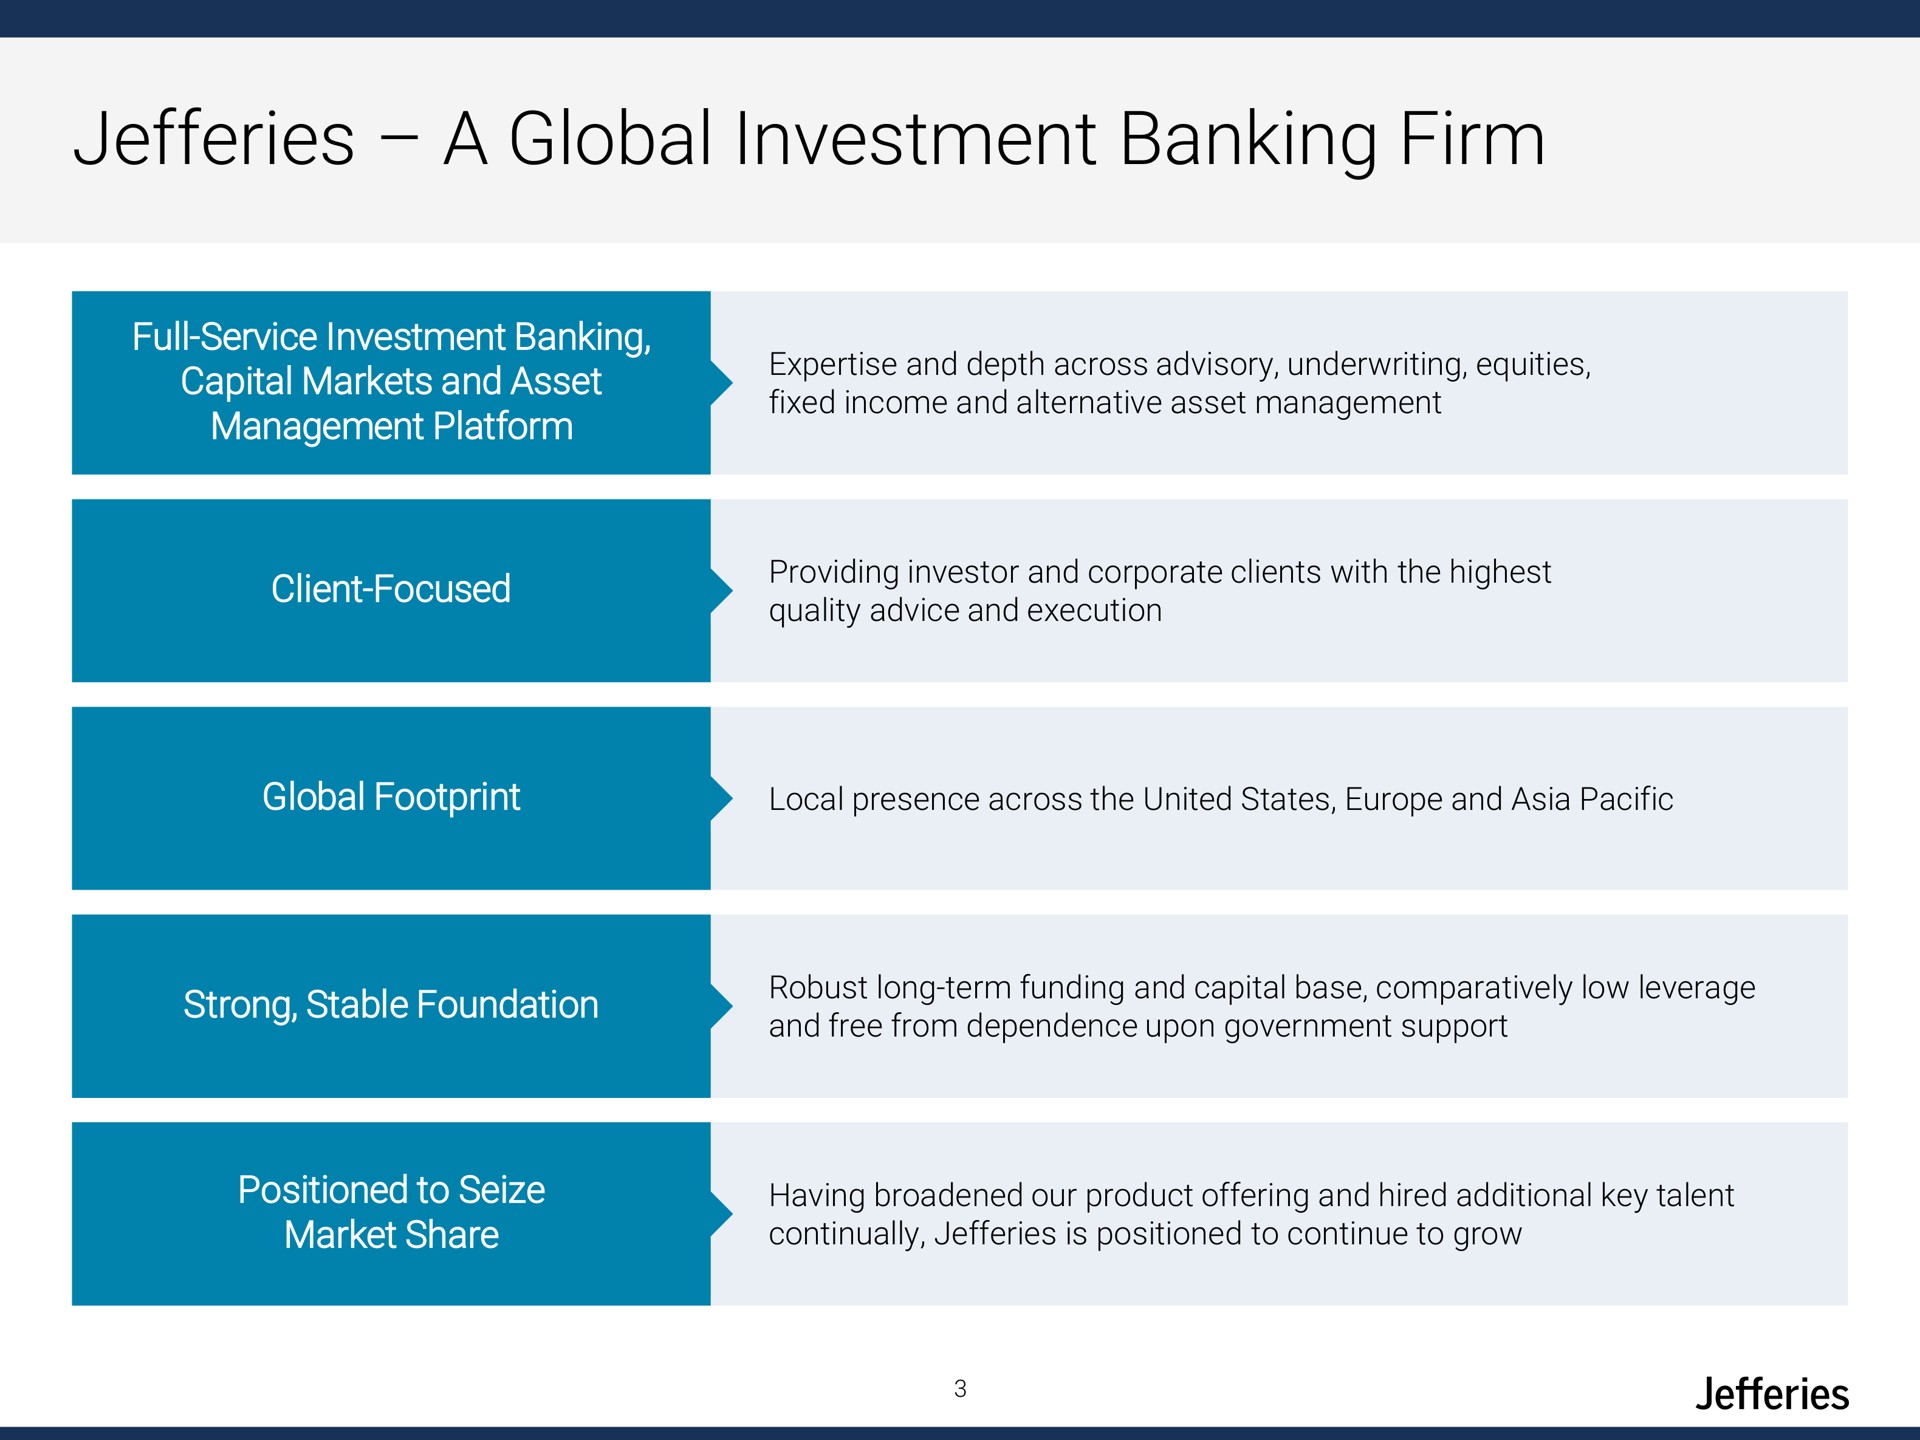 a global investment banking firm | Jefferies Financial Group